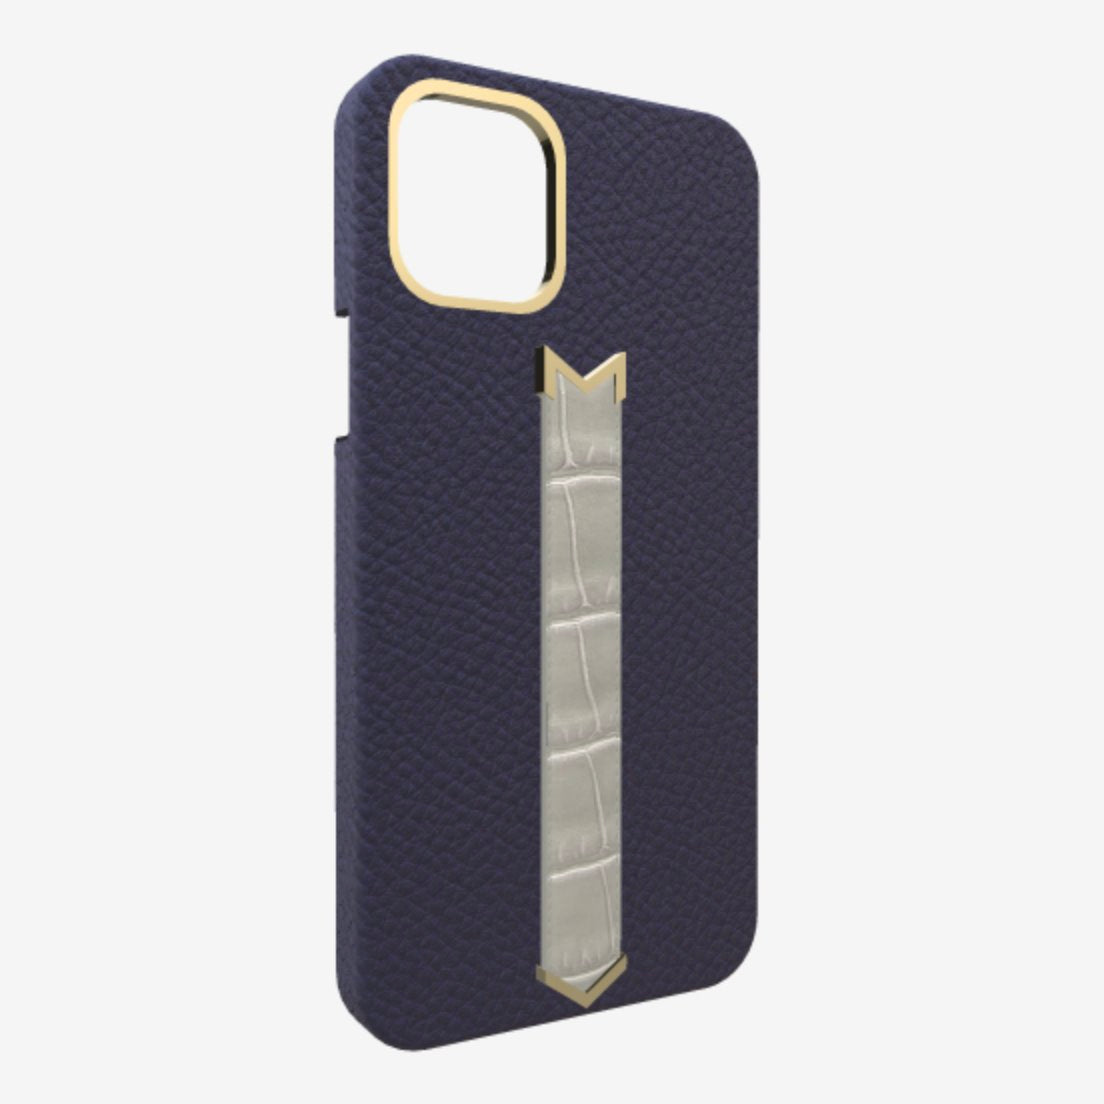 Gold Finger Strap Case for iPhone 13 Pro Max in Genuine Calfskin and Alligator Navy Blue Pearl Grey 